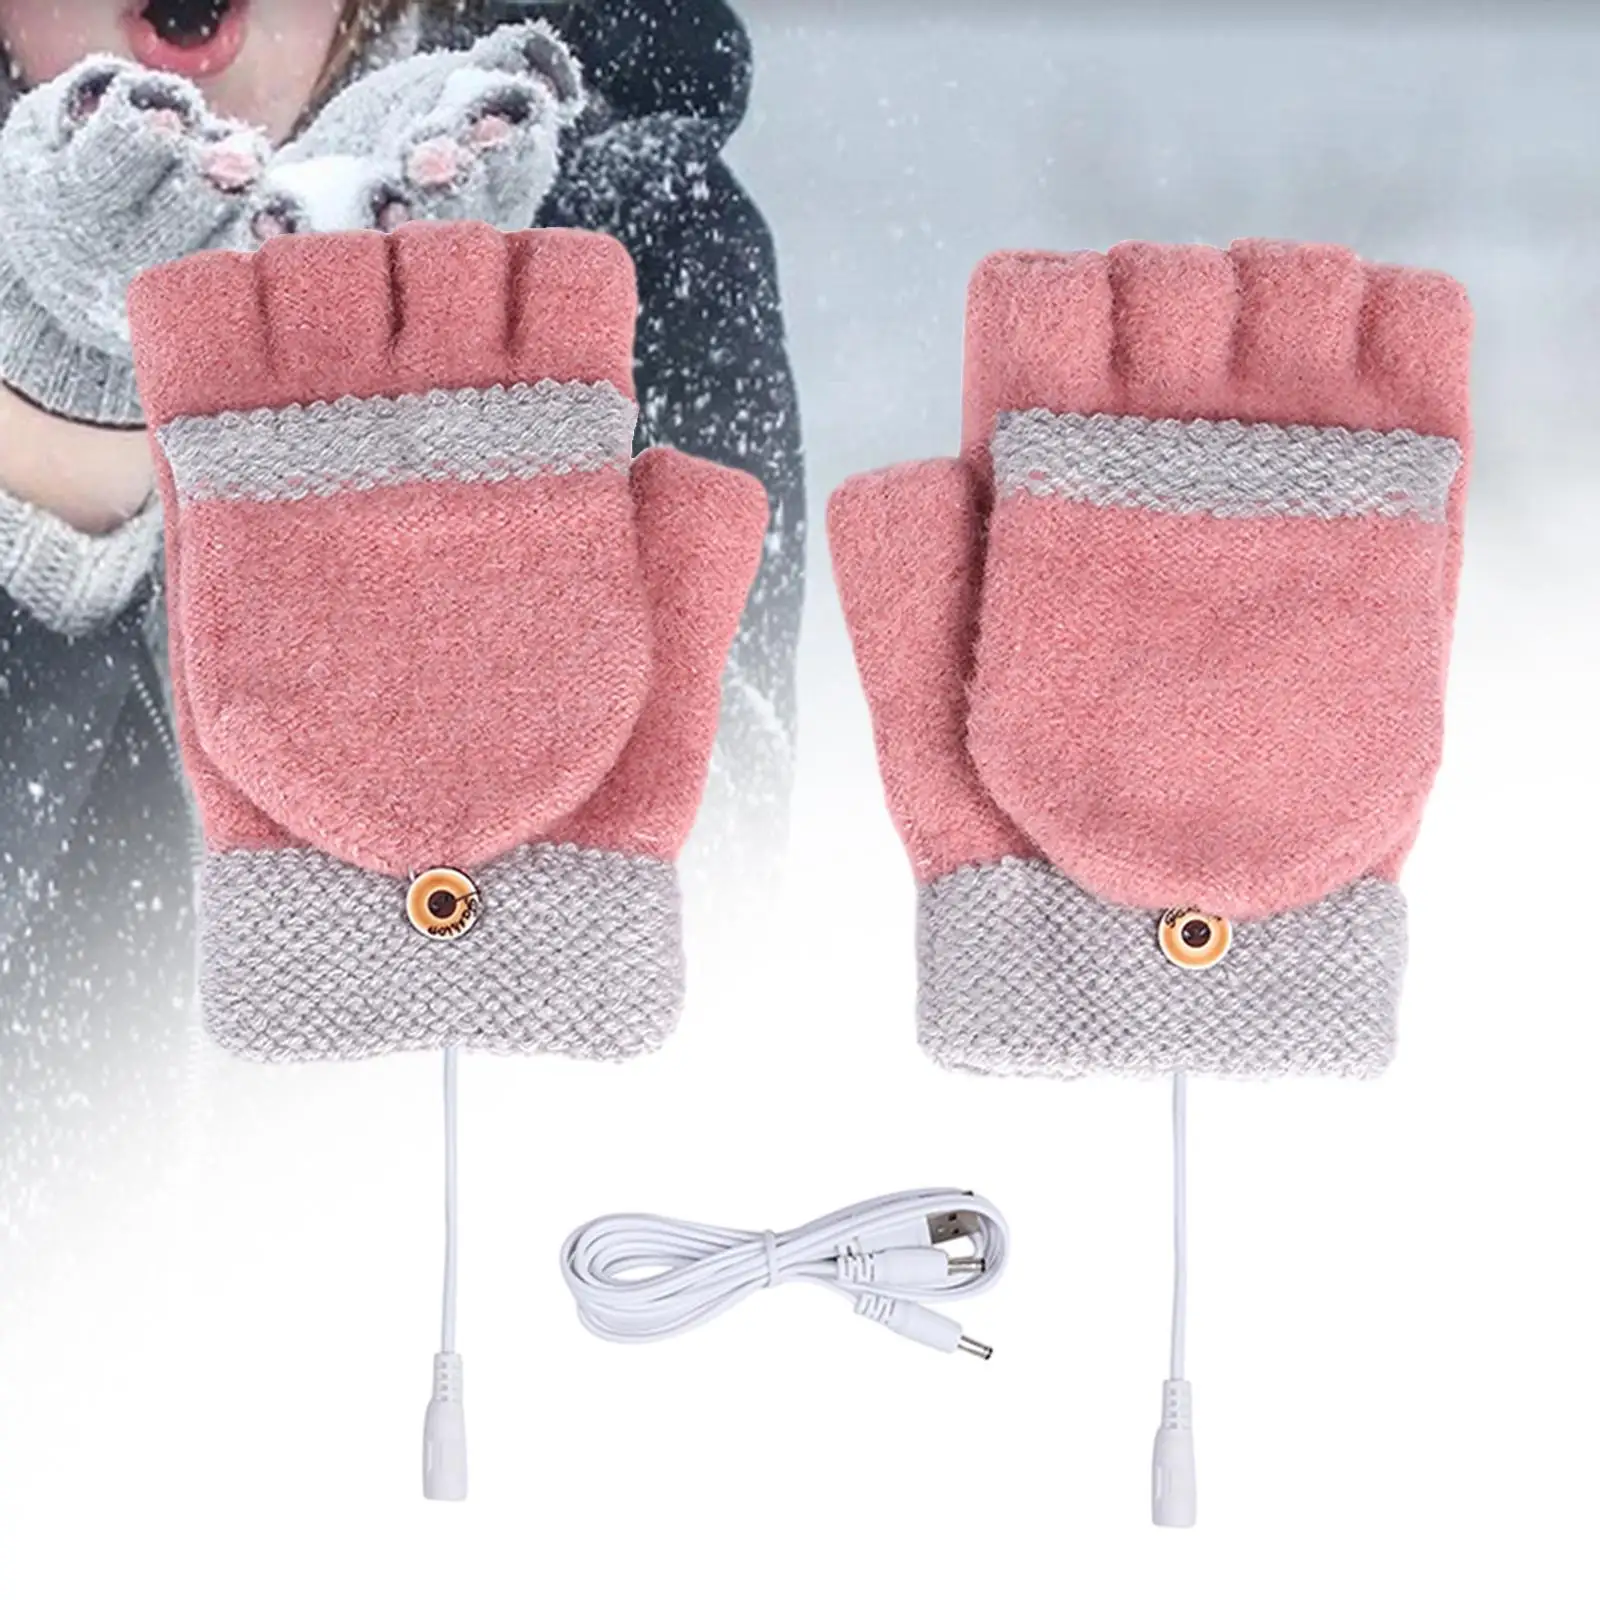 Electric Heated Gloves Hands Warmer Cold Weather Laptop Gloves Heating Gloves for Women for Winter Fishing Skiing Sports